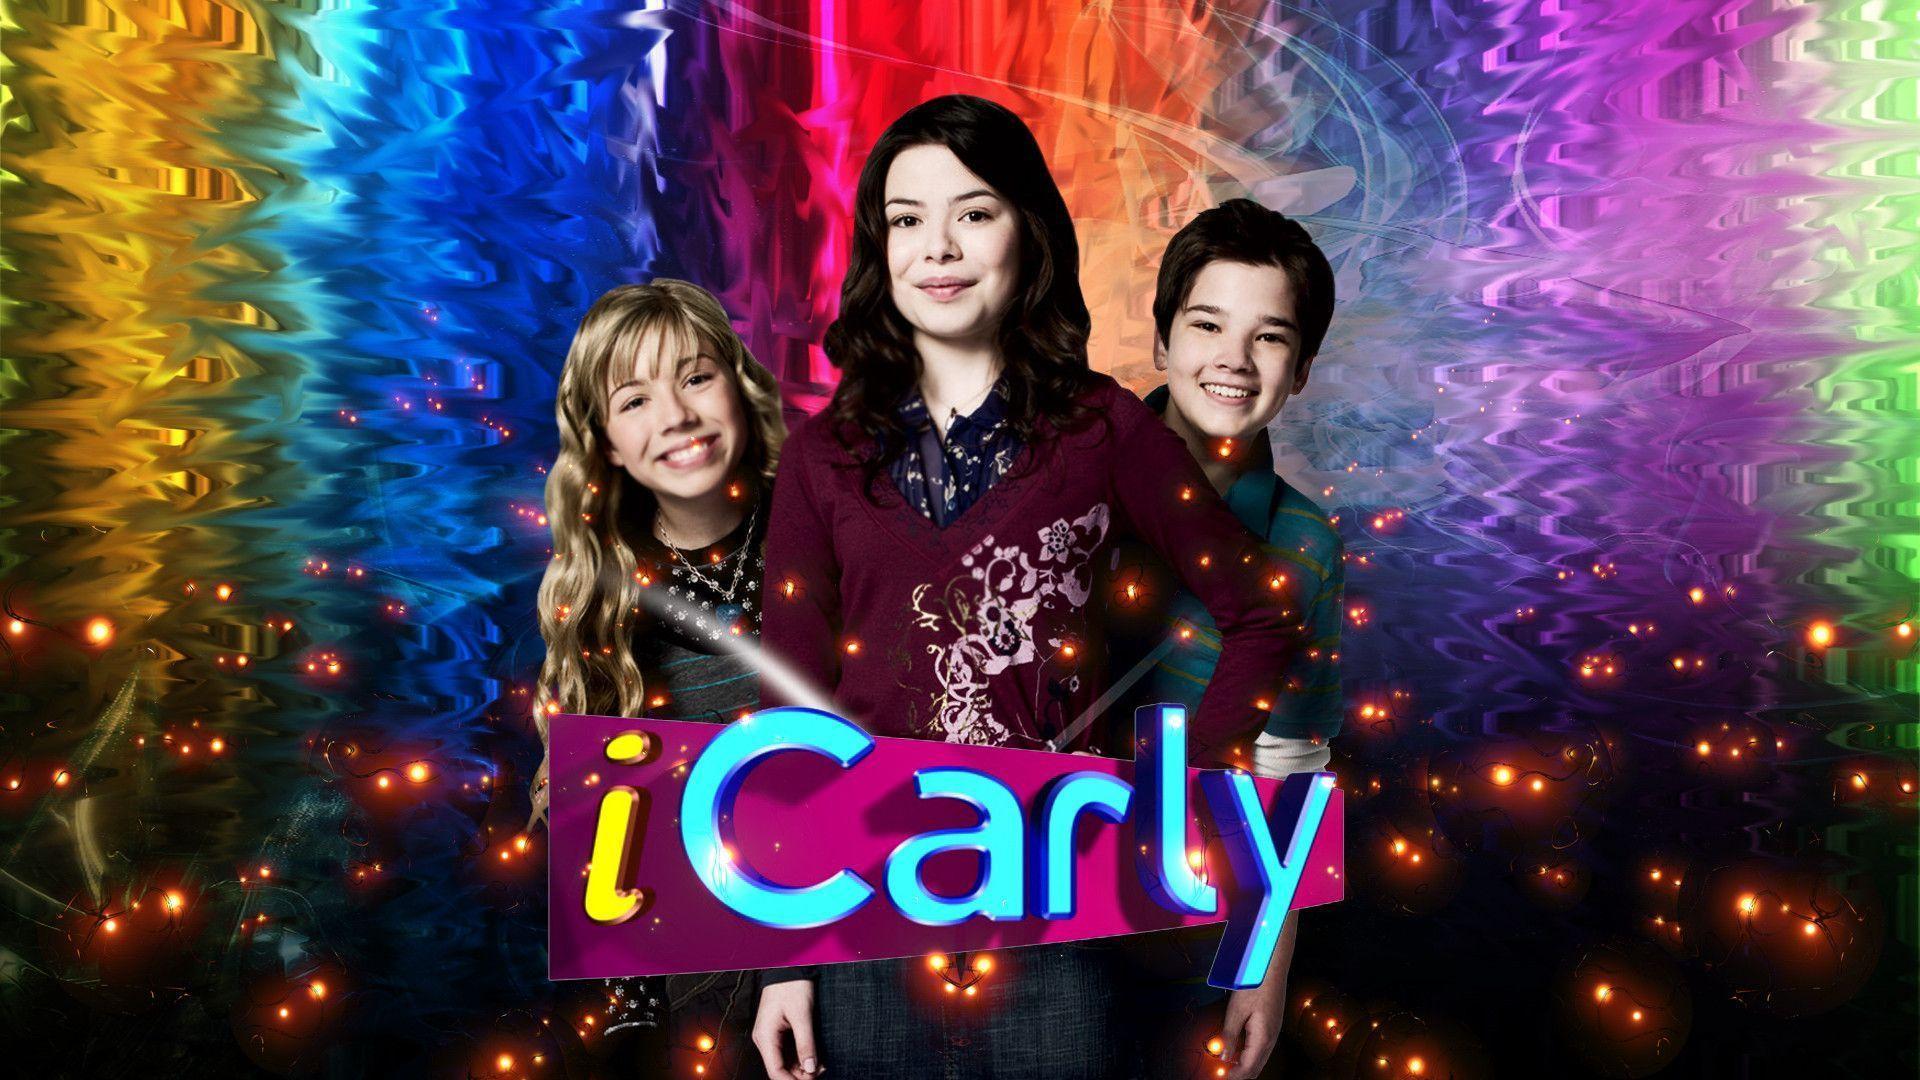 Icarly Backgrounds -